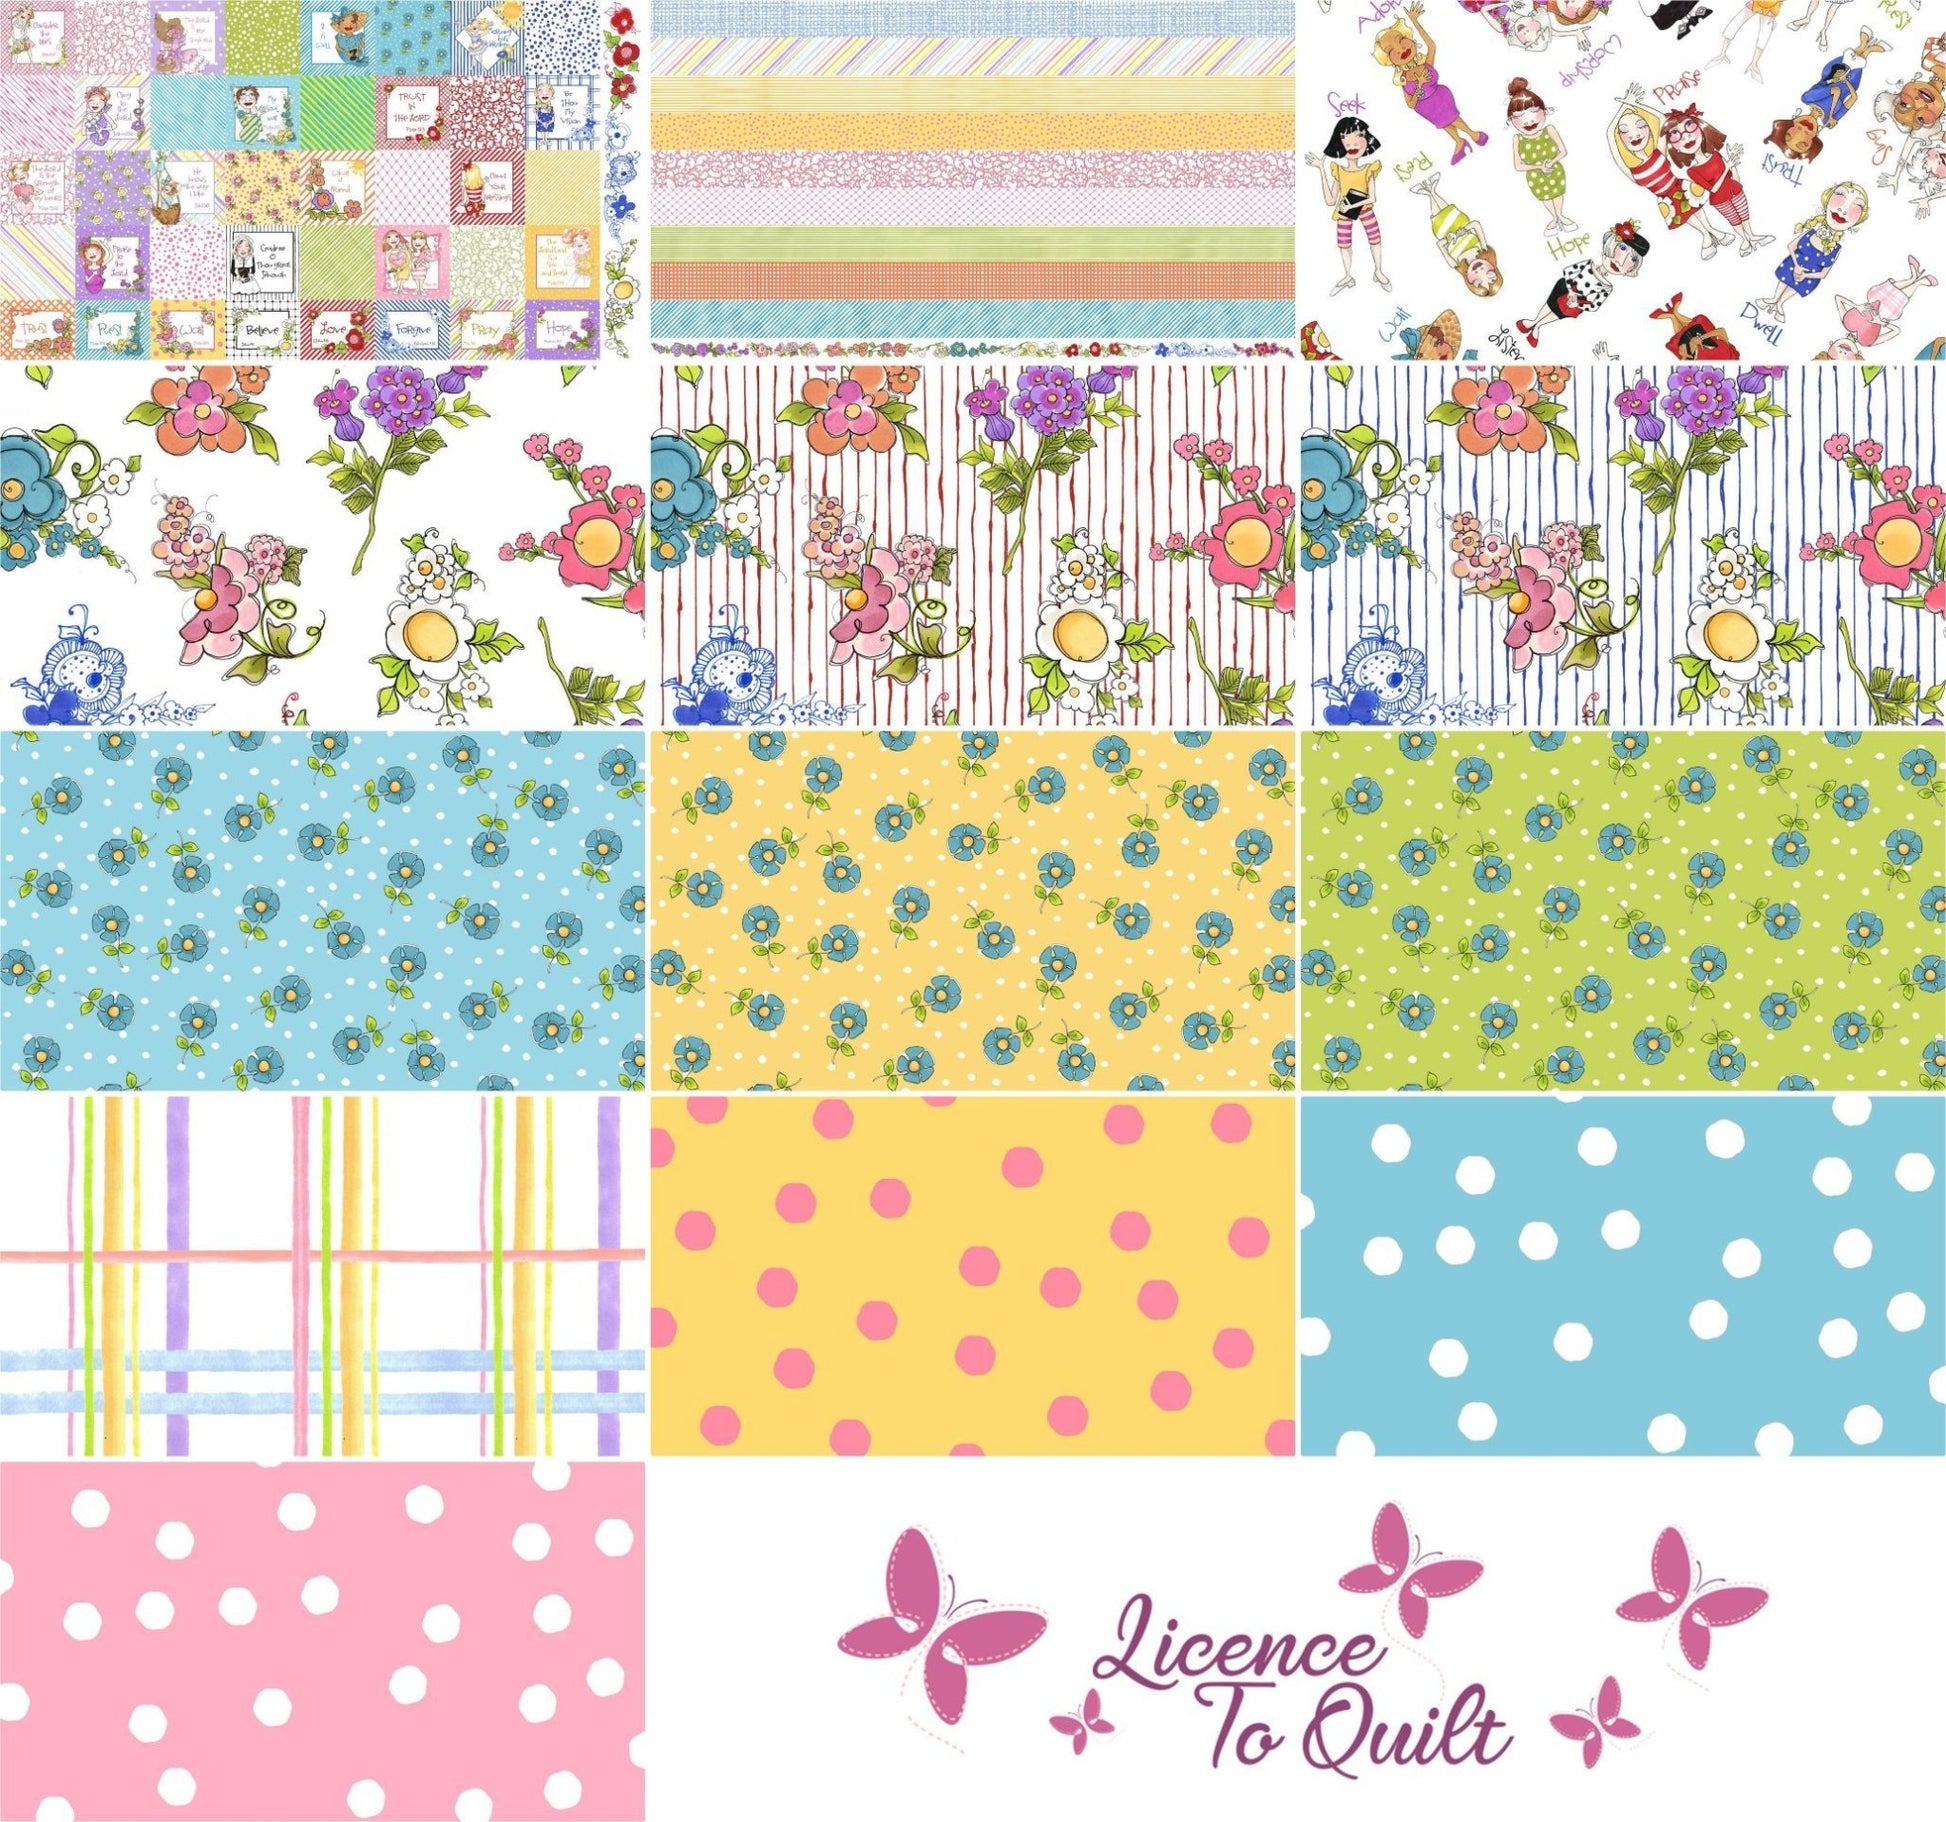 Joy Journey - Daisy Dots Yellow Fabric - Licence To Quilt